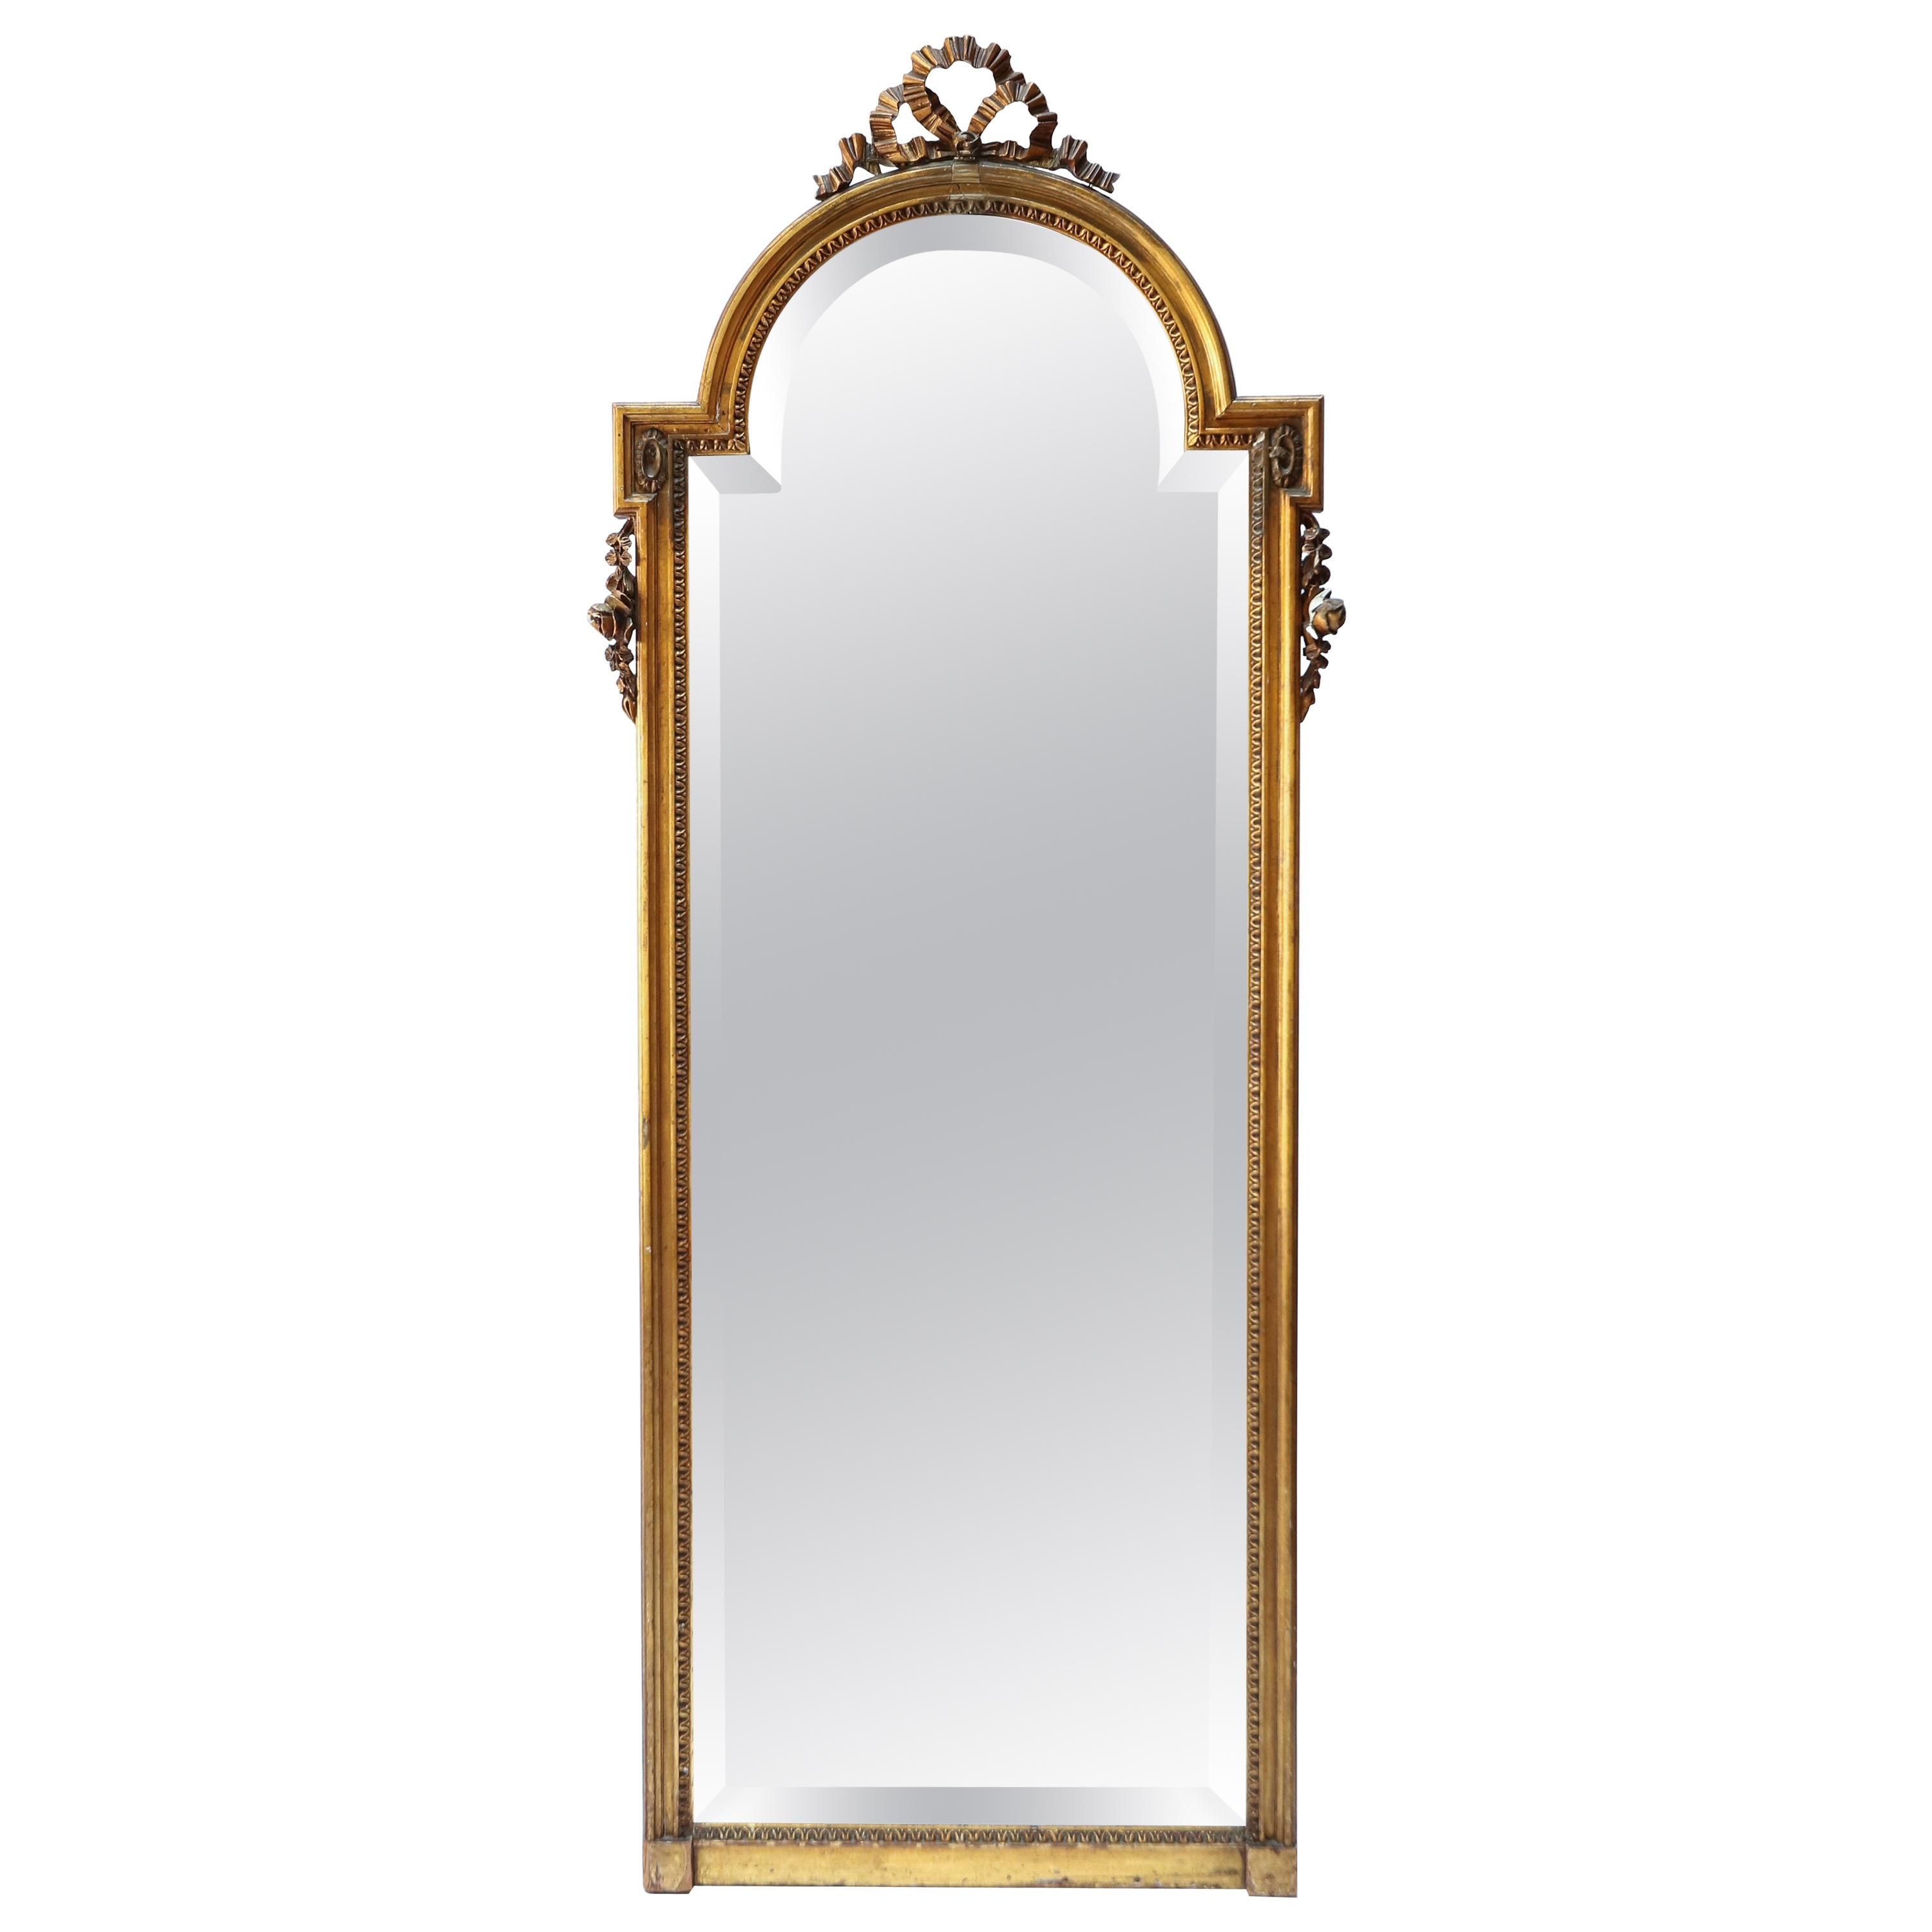 Crystal And Brass Mirror In 2019 Mirror Brass Mirror Mirror Intended For Sajish Oval Crystal Wall Mirrors (View 23 of 30)